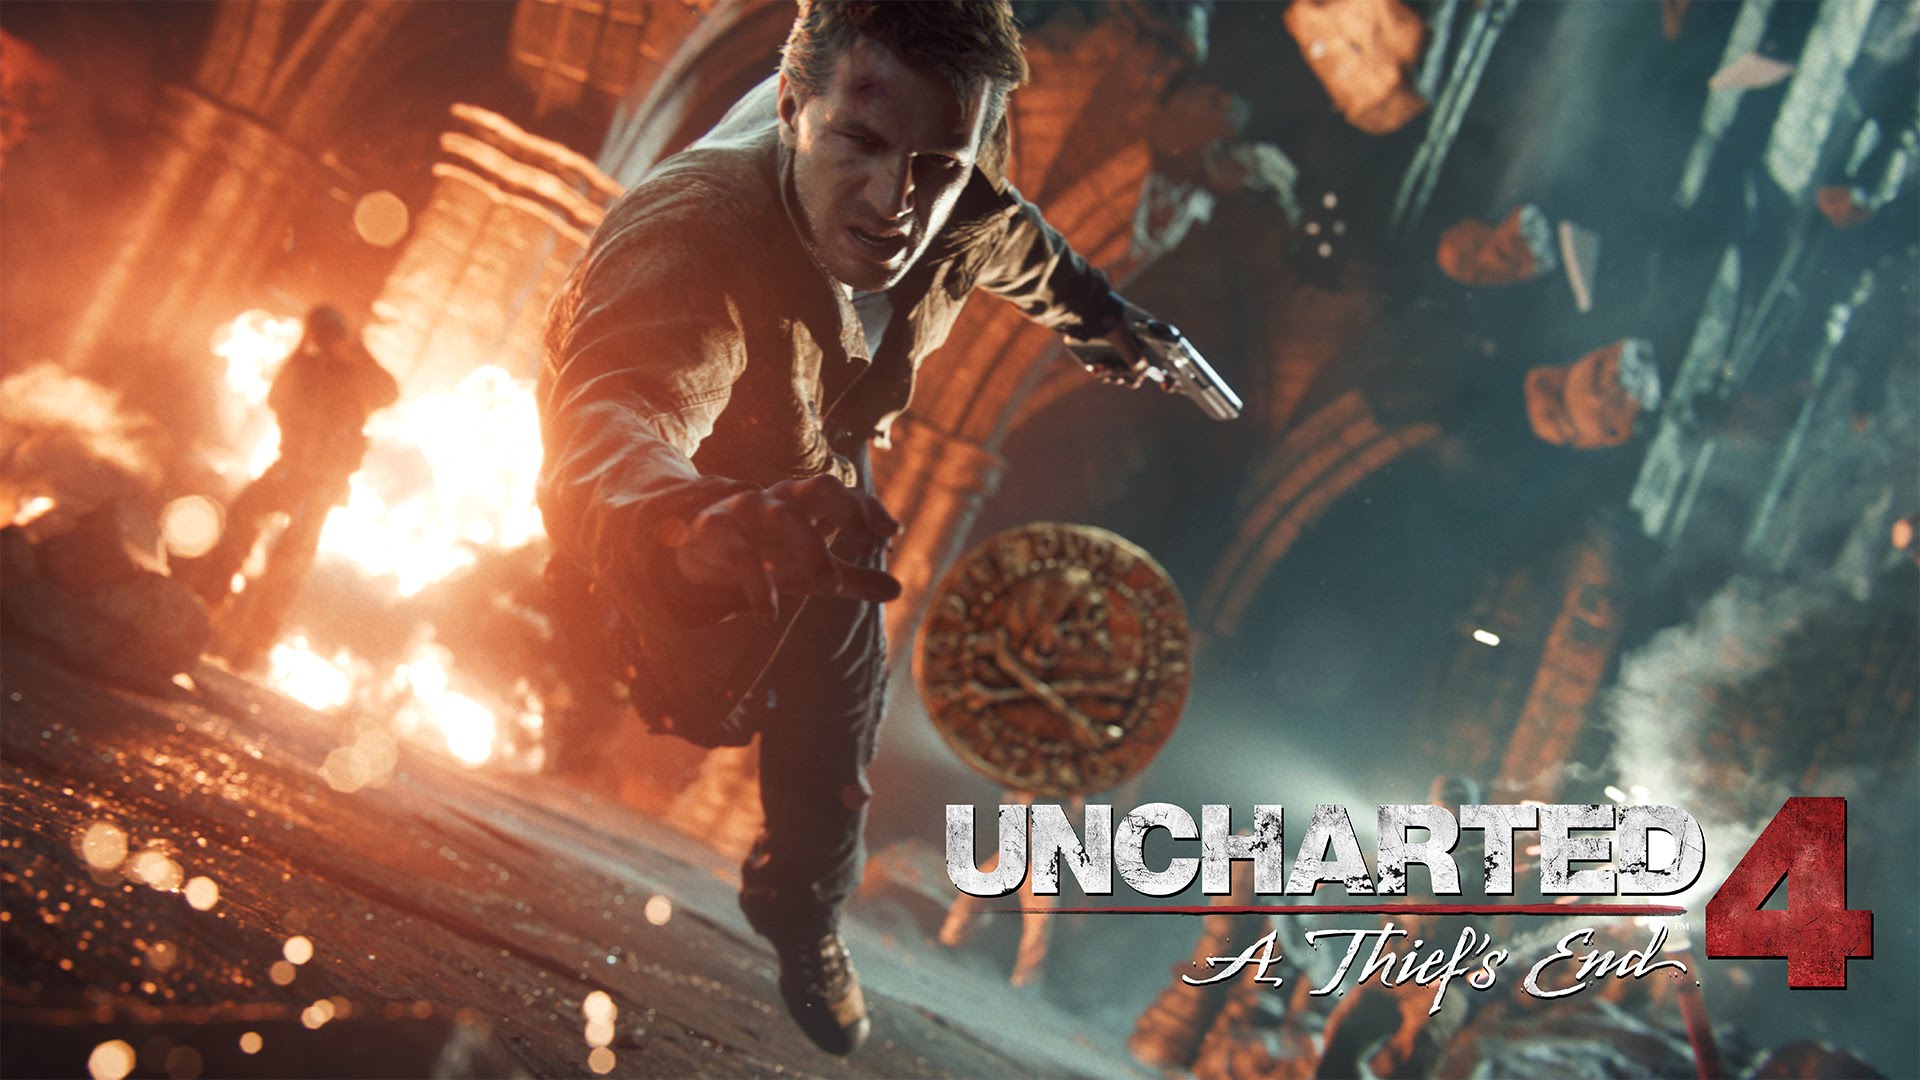 Video Game Uncharted 4: A Thief's End HD Wallpaper | Background Image